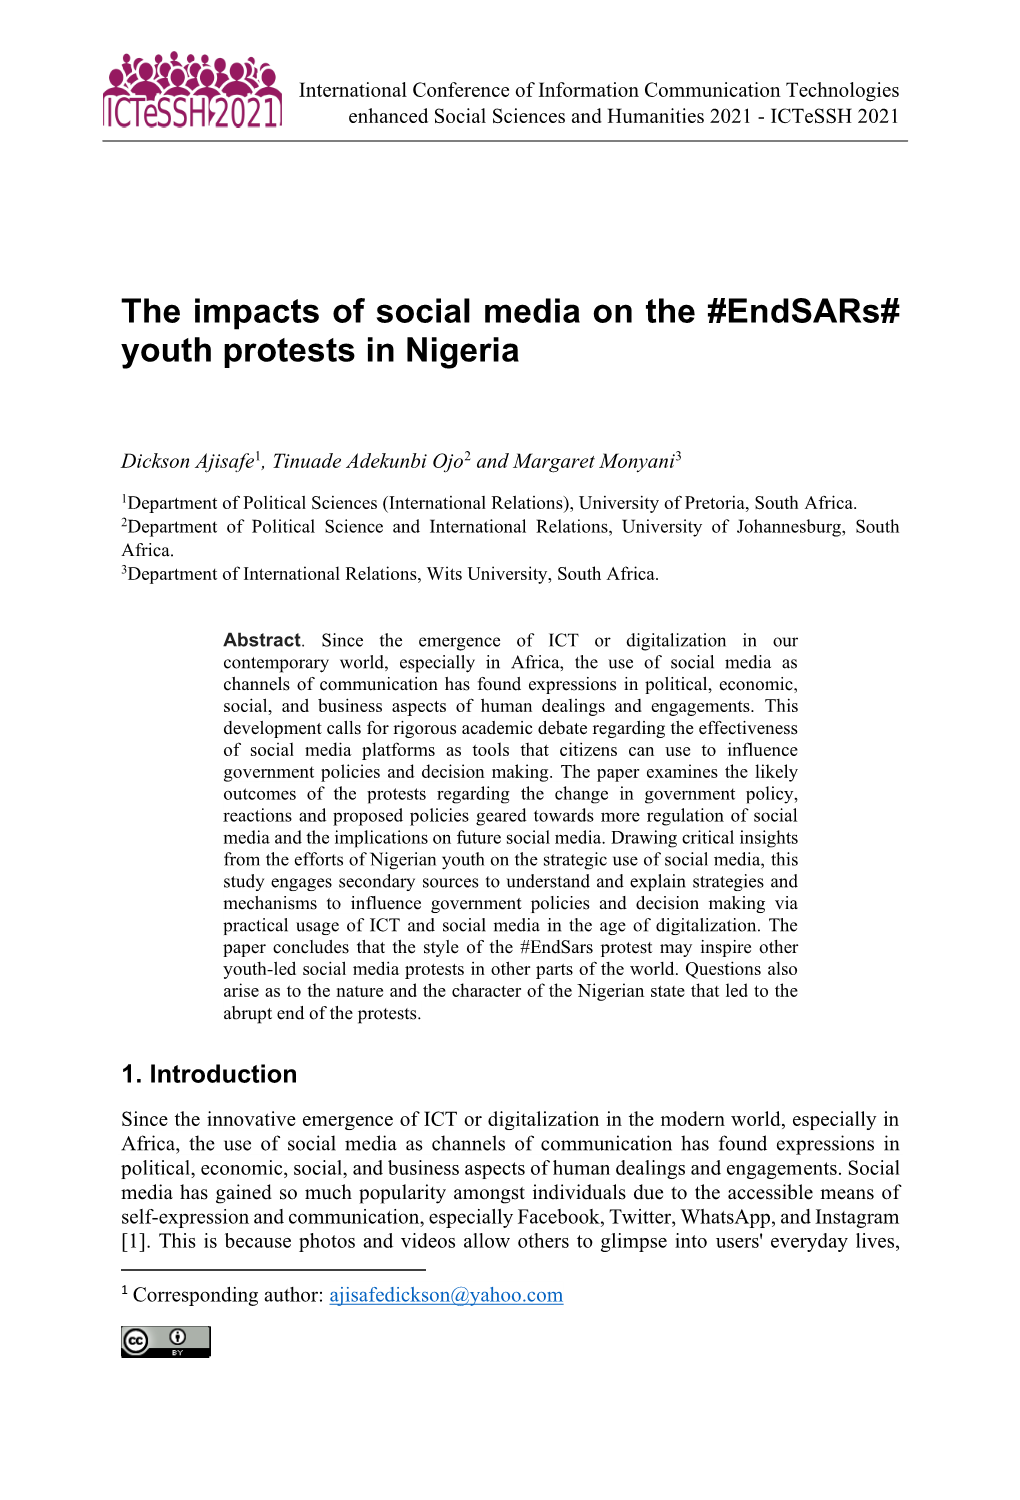 The Impacts of Social Media on the #Endsars# Youth Protests in Nigeria